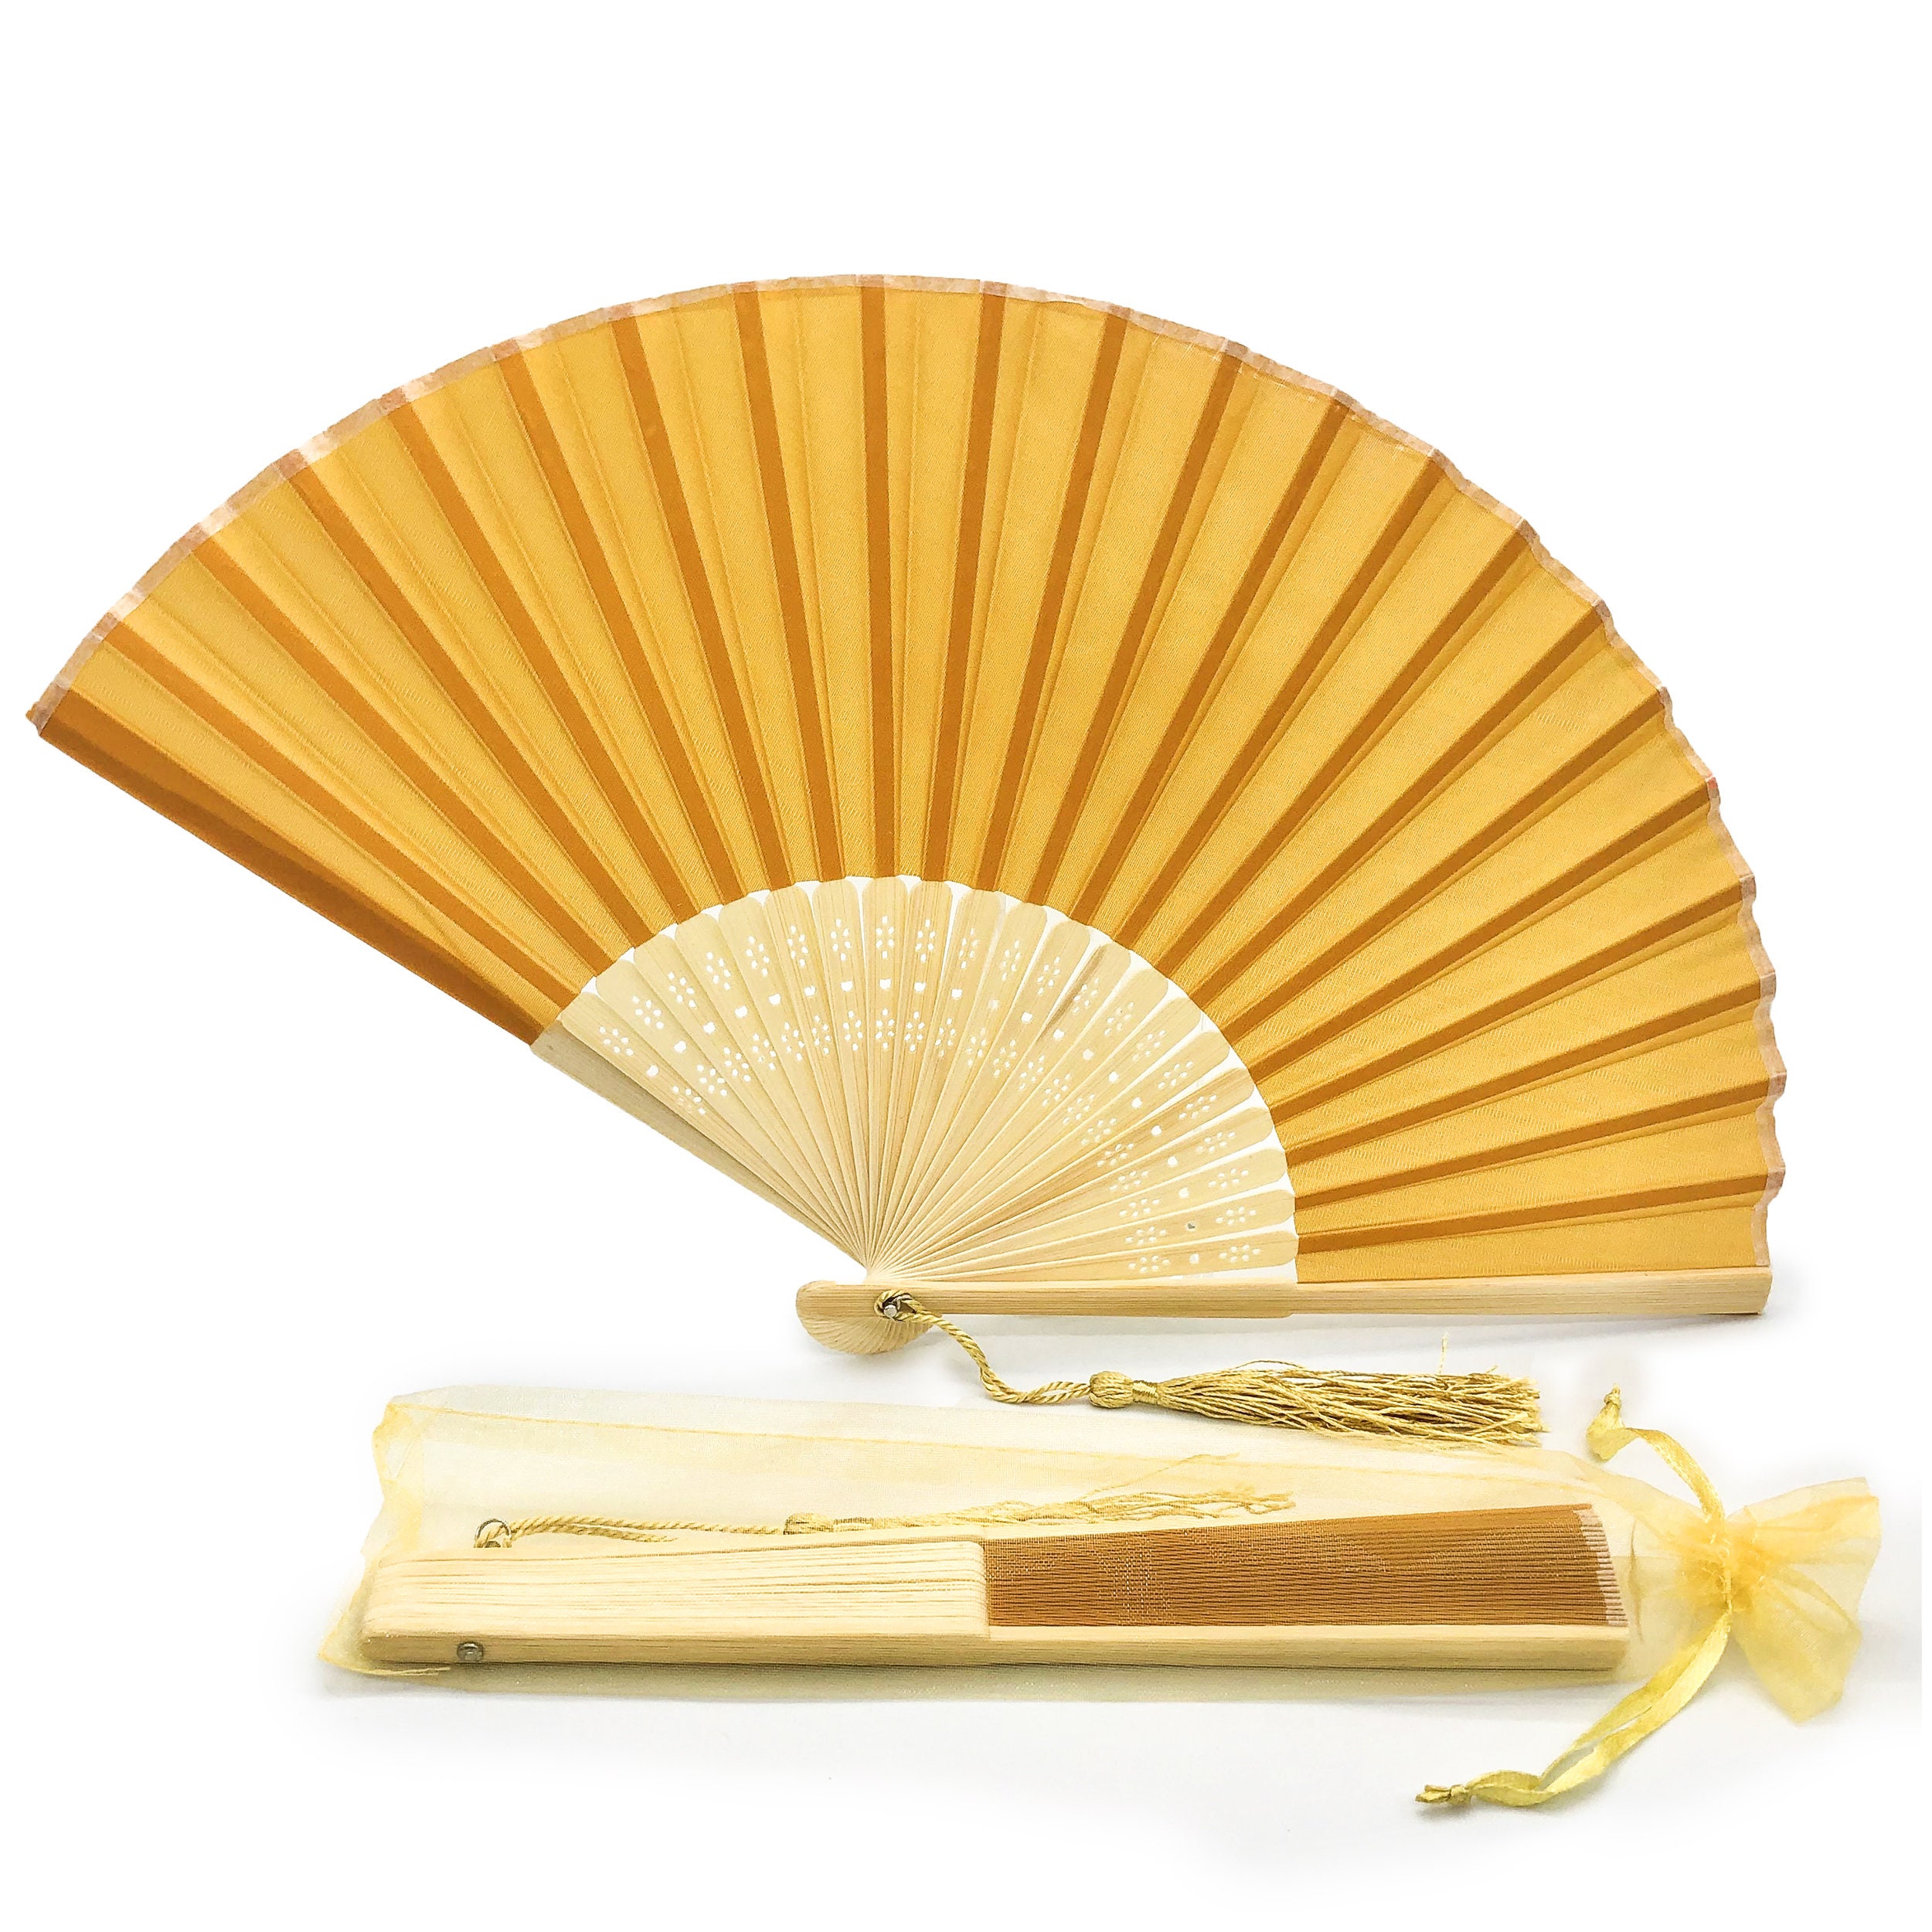 10 x Gold / Silver Bamboo Fans Wedding Guests or Party Favours Hand Held Fan  UK